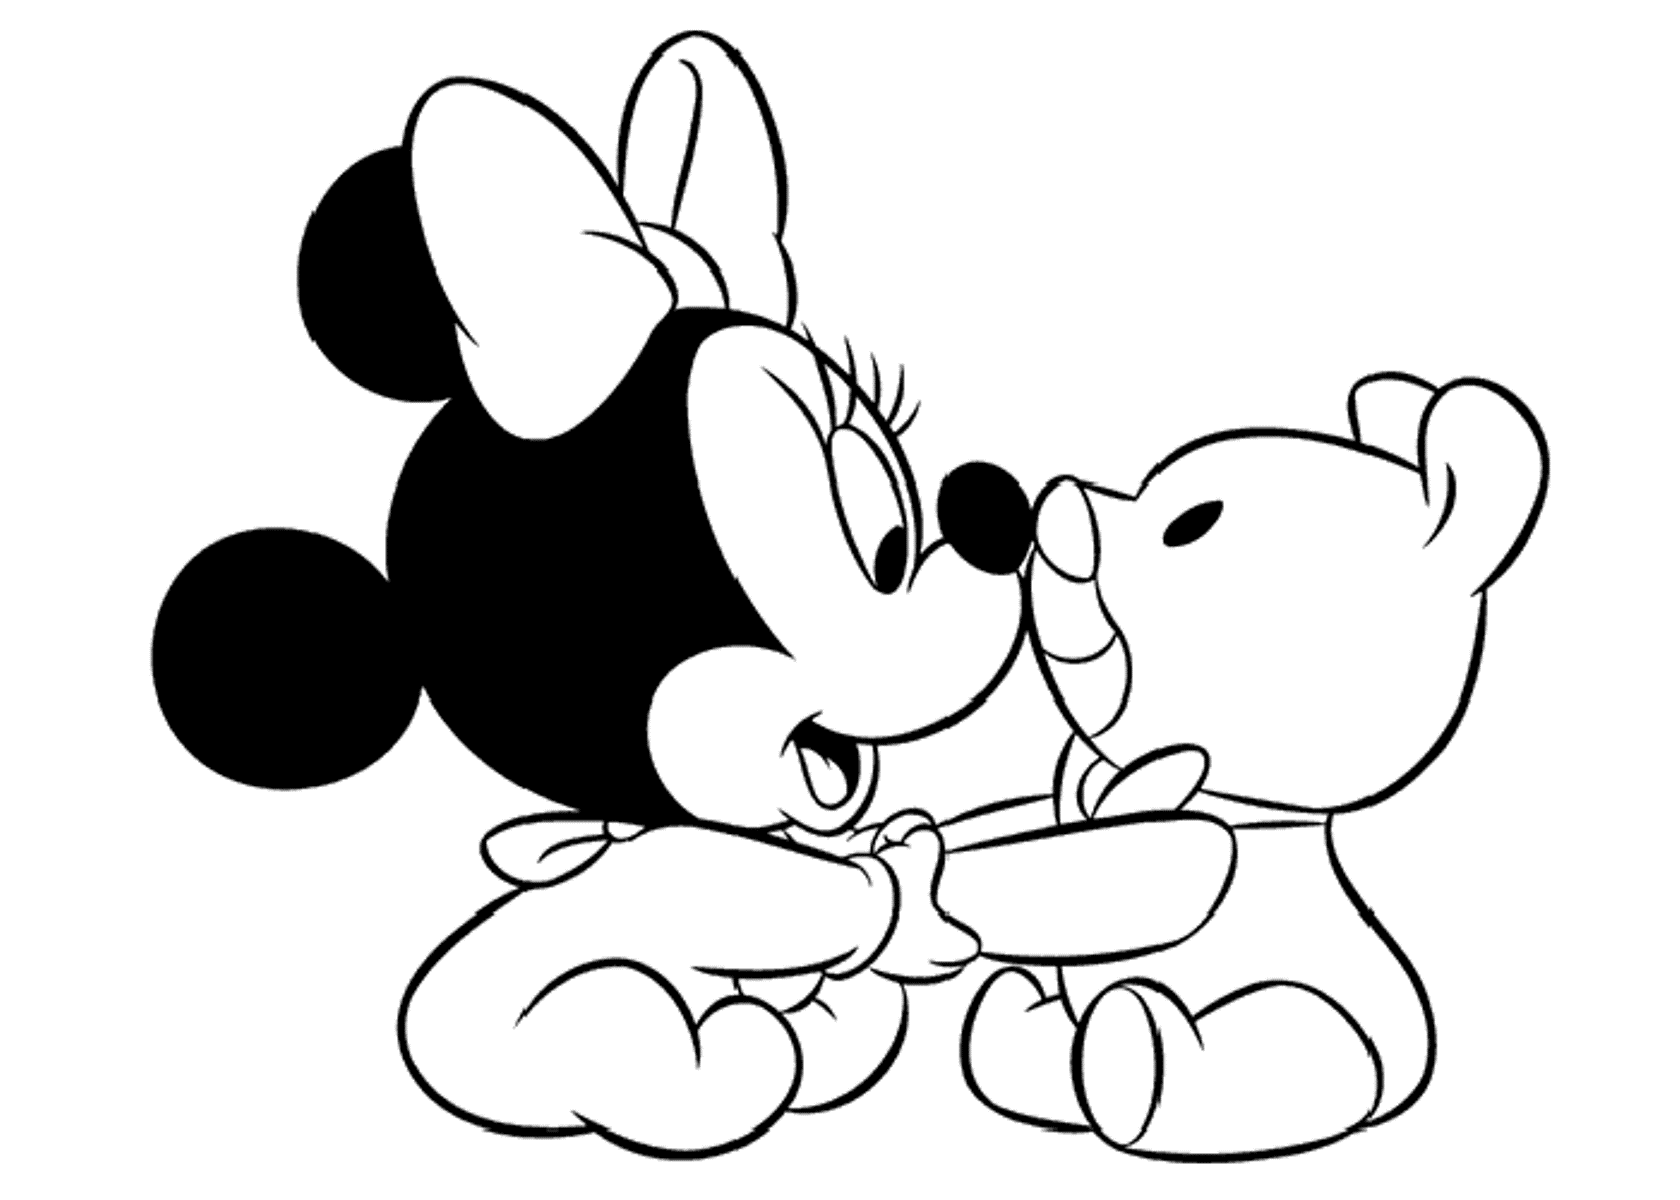 Baby Disney Coloring Pages Minnie Mouse Coloring Pages Baby Coloring Pages Disney Coloring Pages